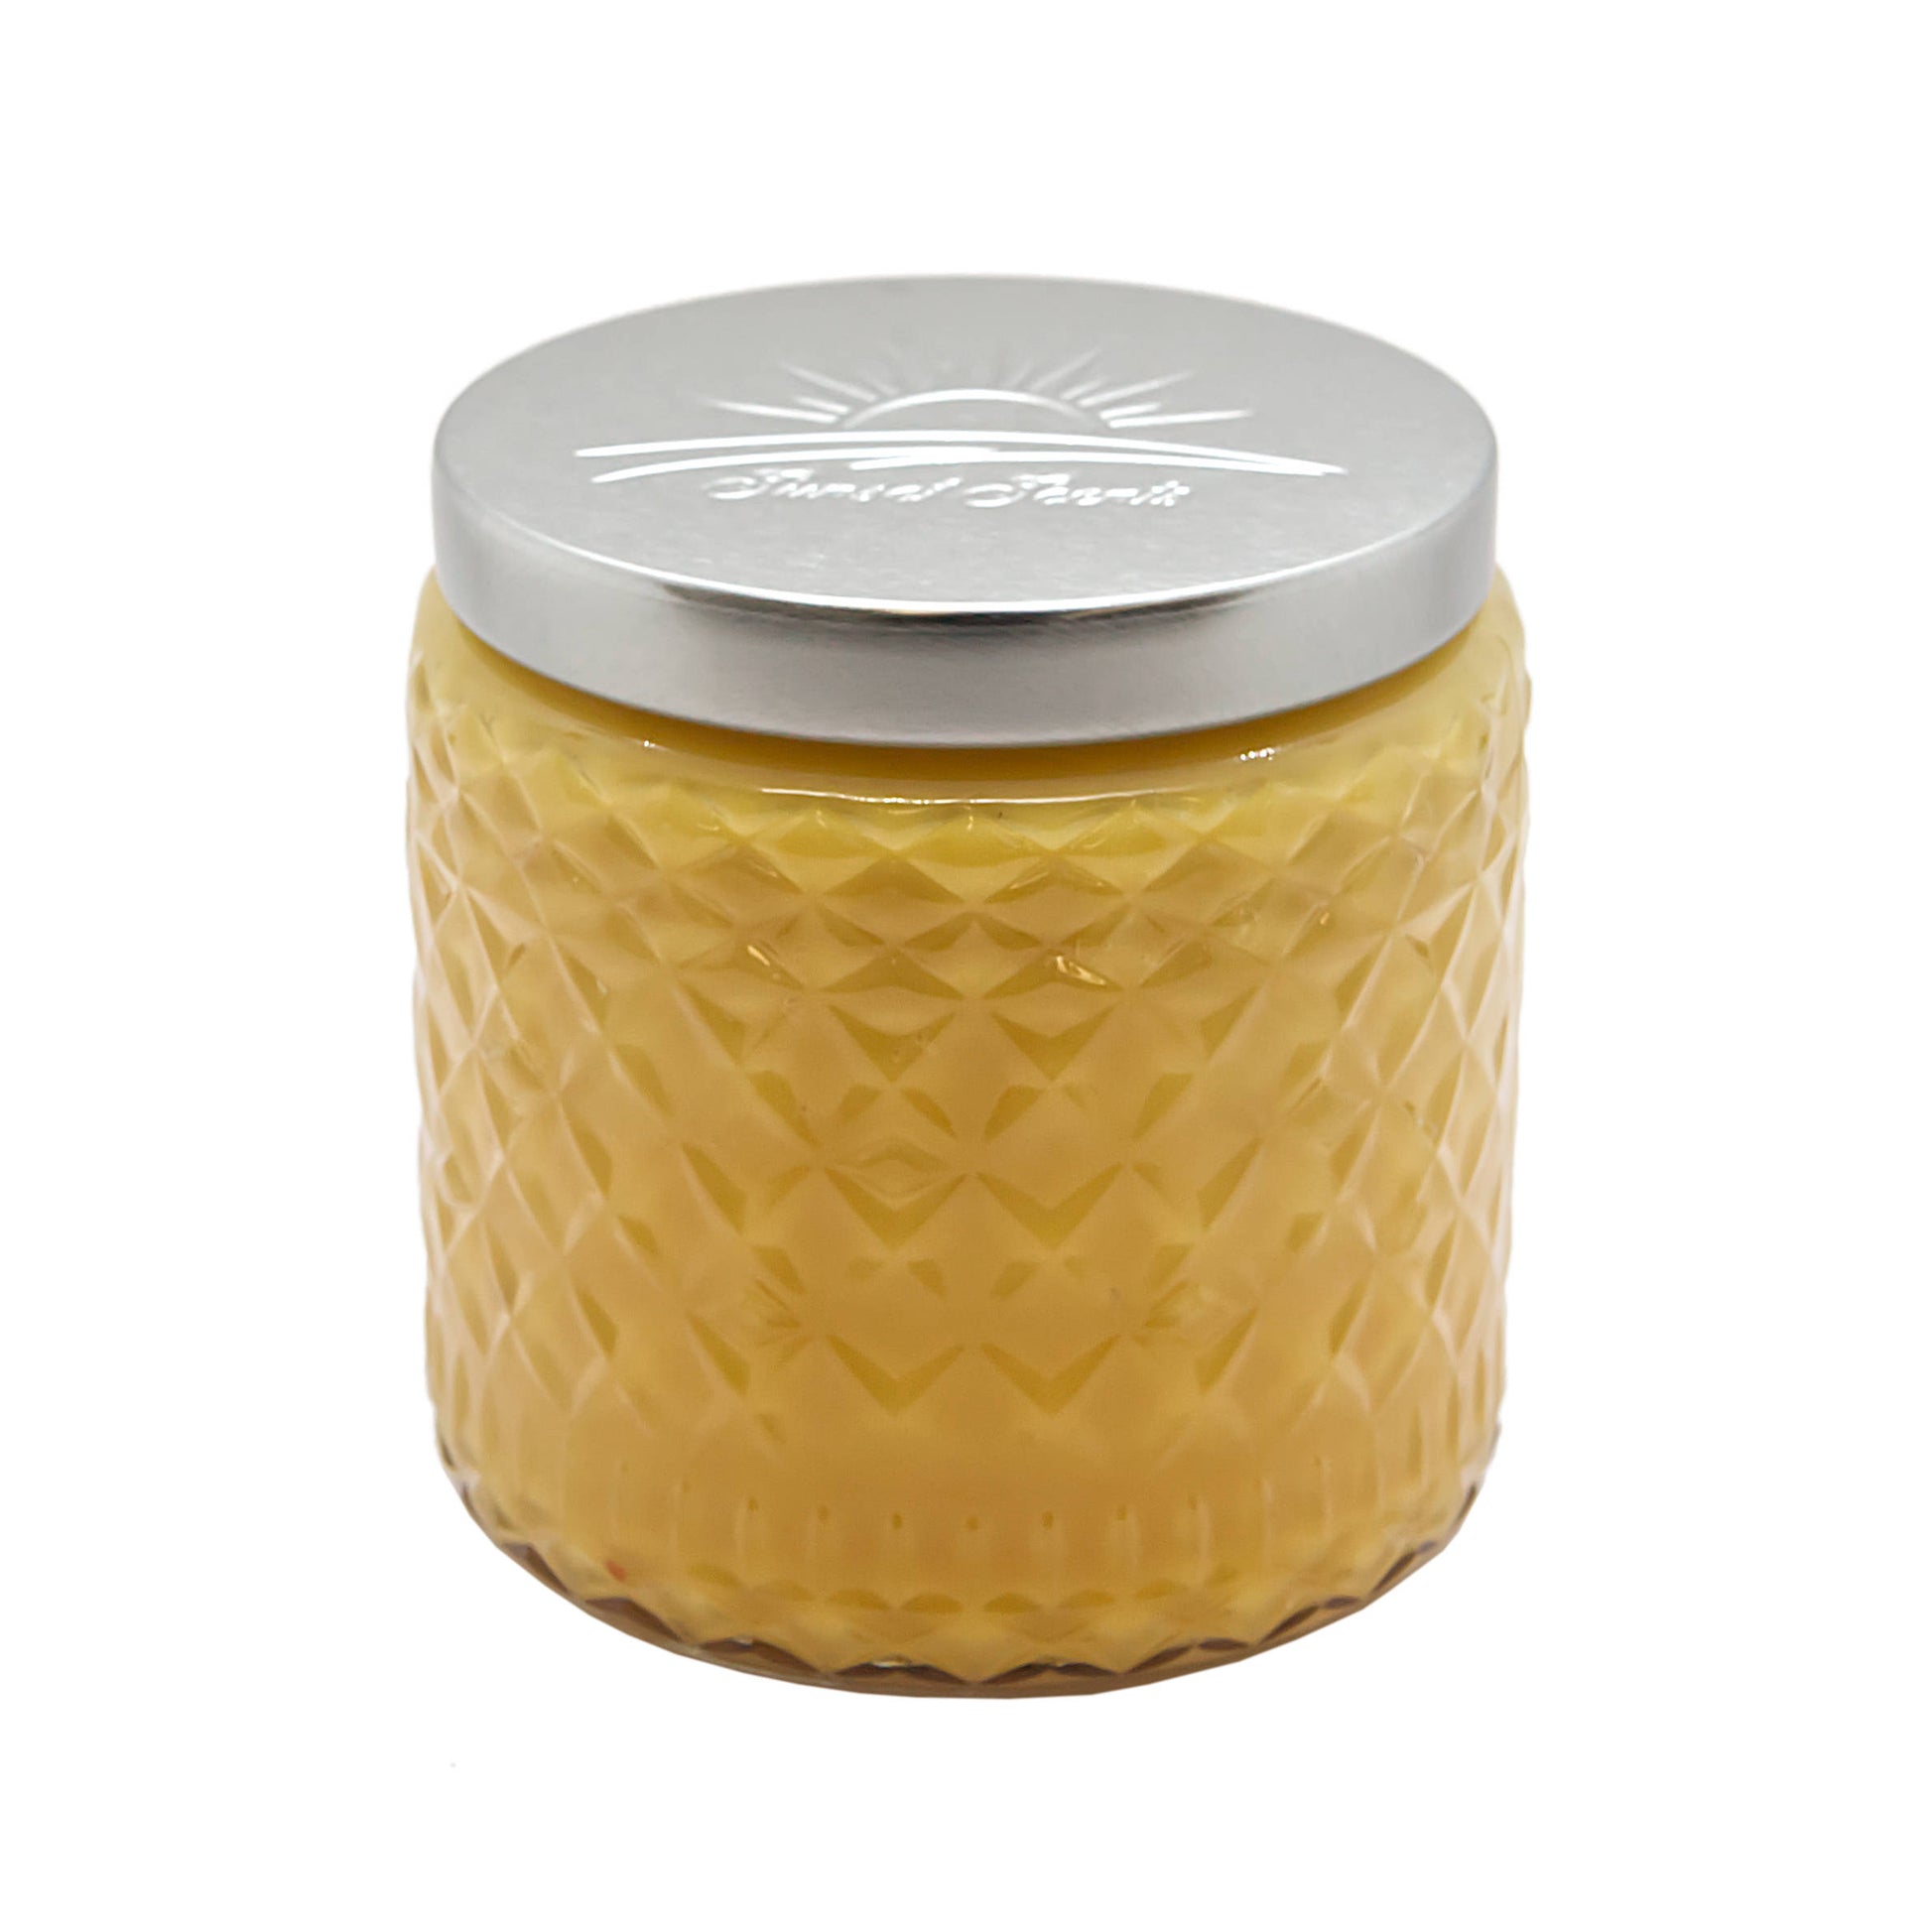 Orange Blossoms Scented Candle 16oz